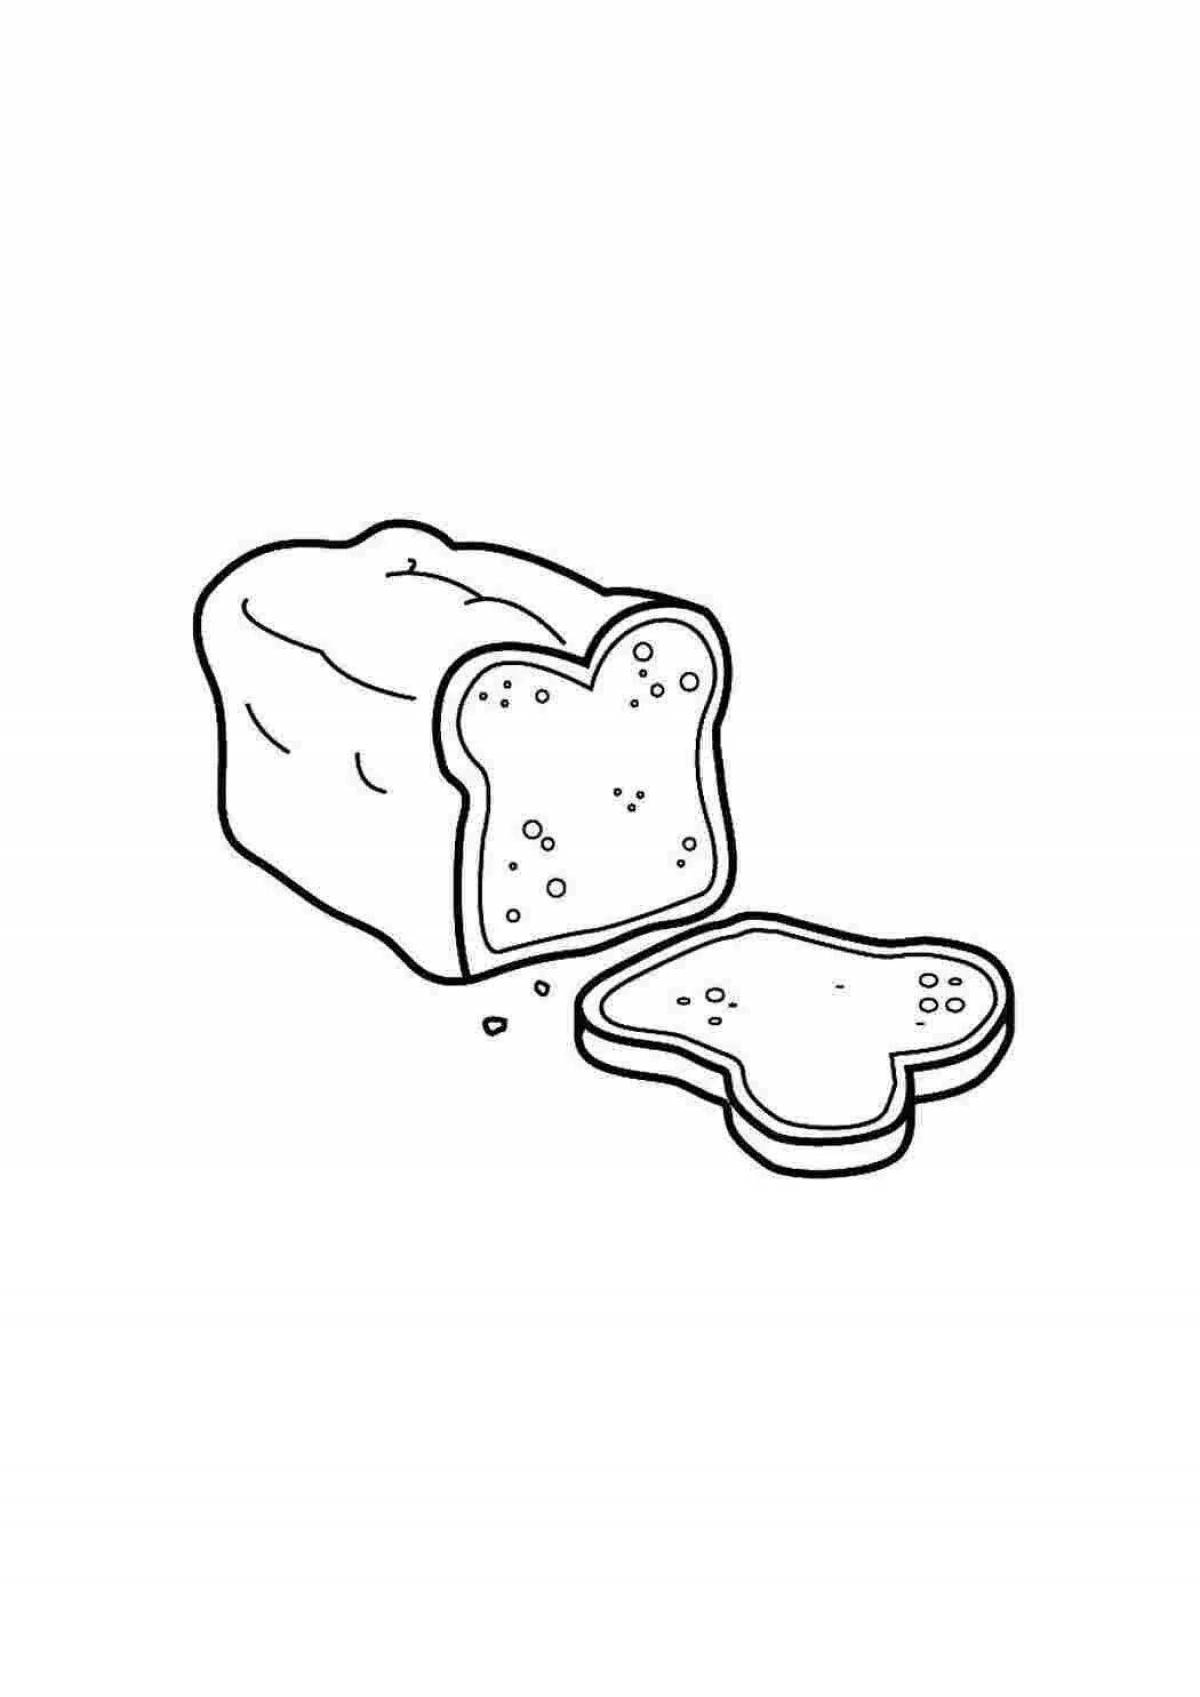 Grilled slice of bread coloring page